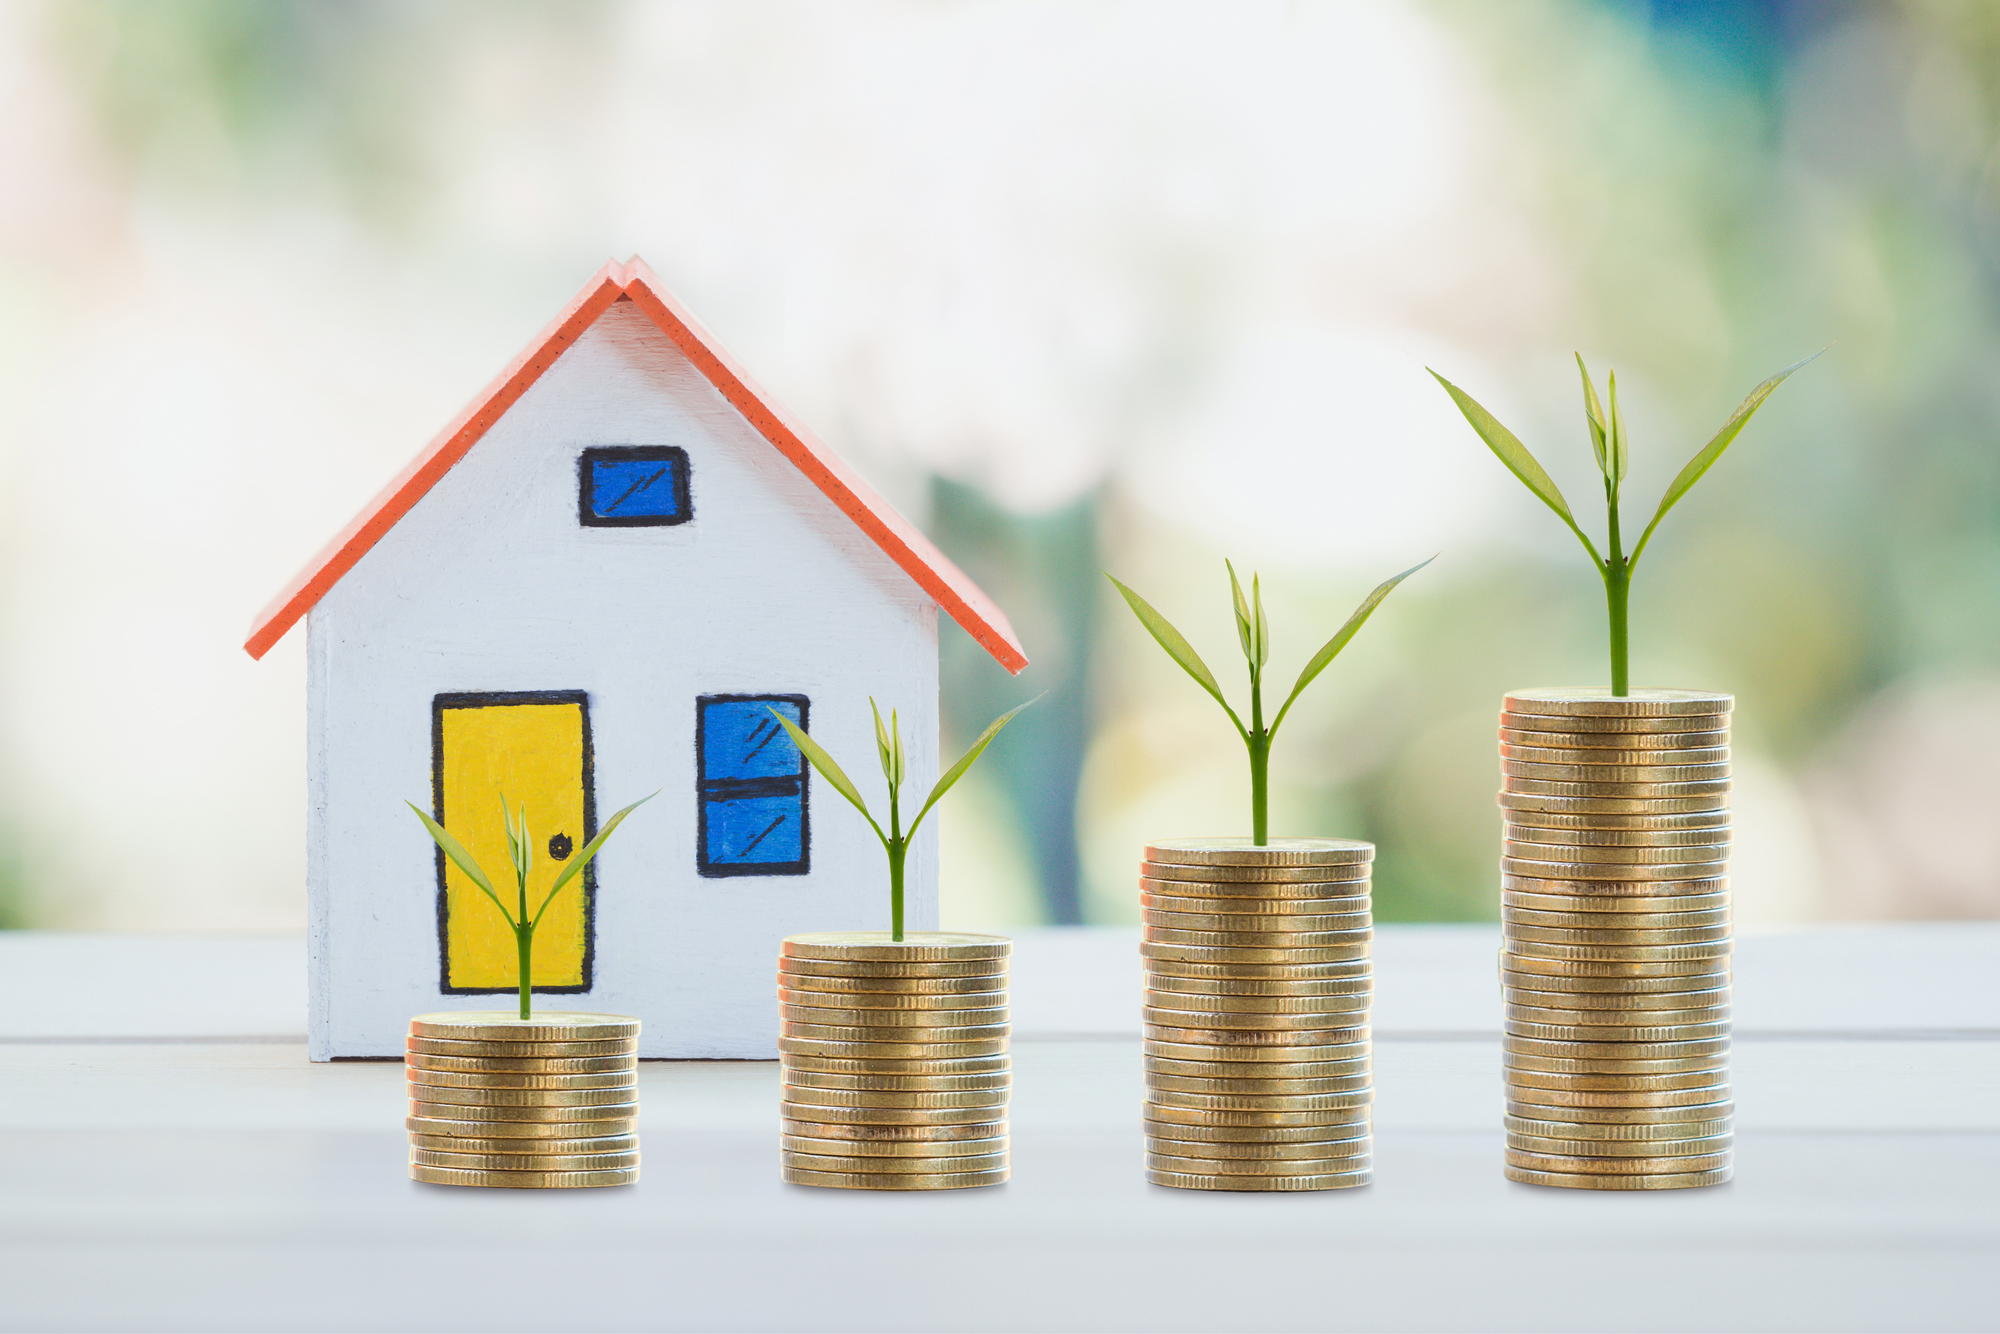 How To Invest In Real Estate With Little Money